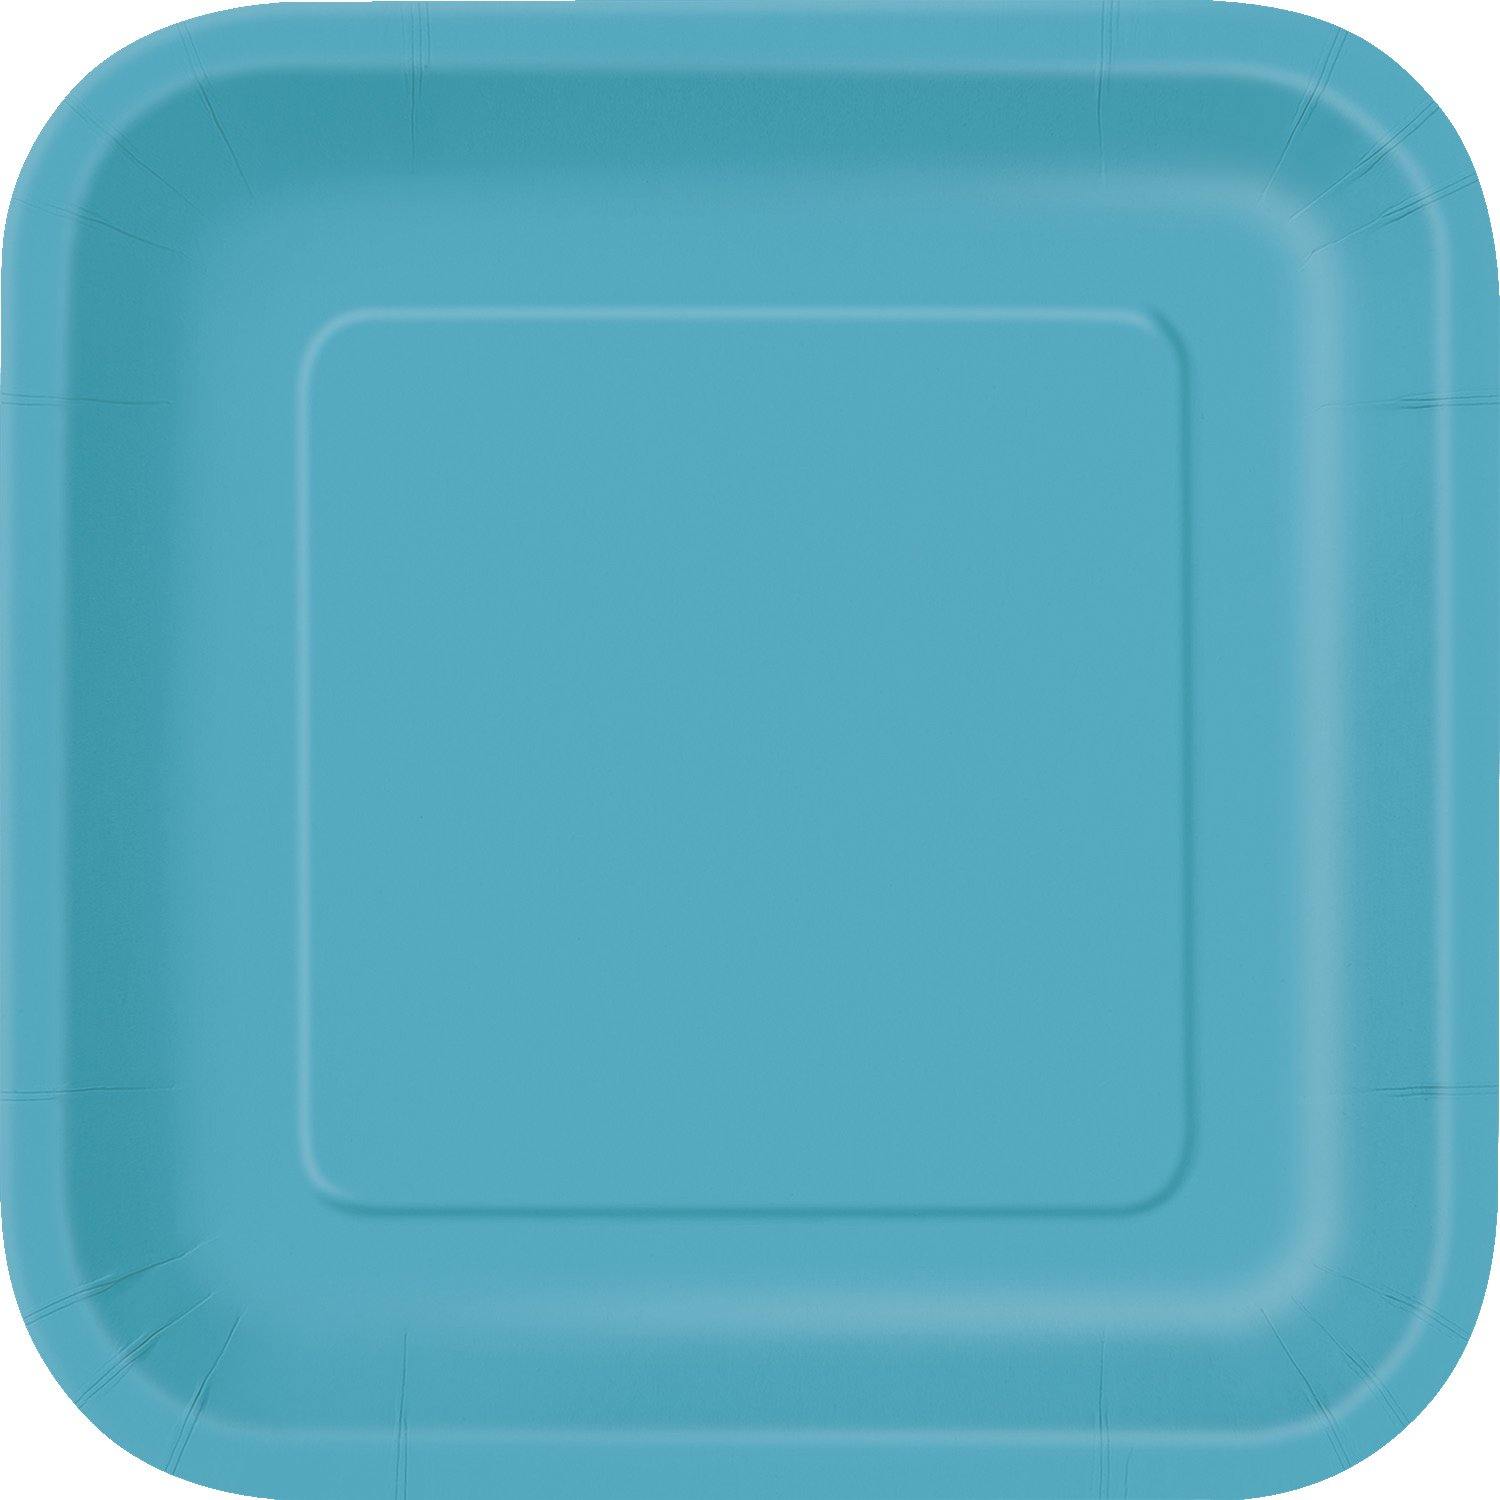 16 Pack Caribbean Teal Square Paper Plates - 18cm - The Base Warehouse